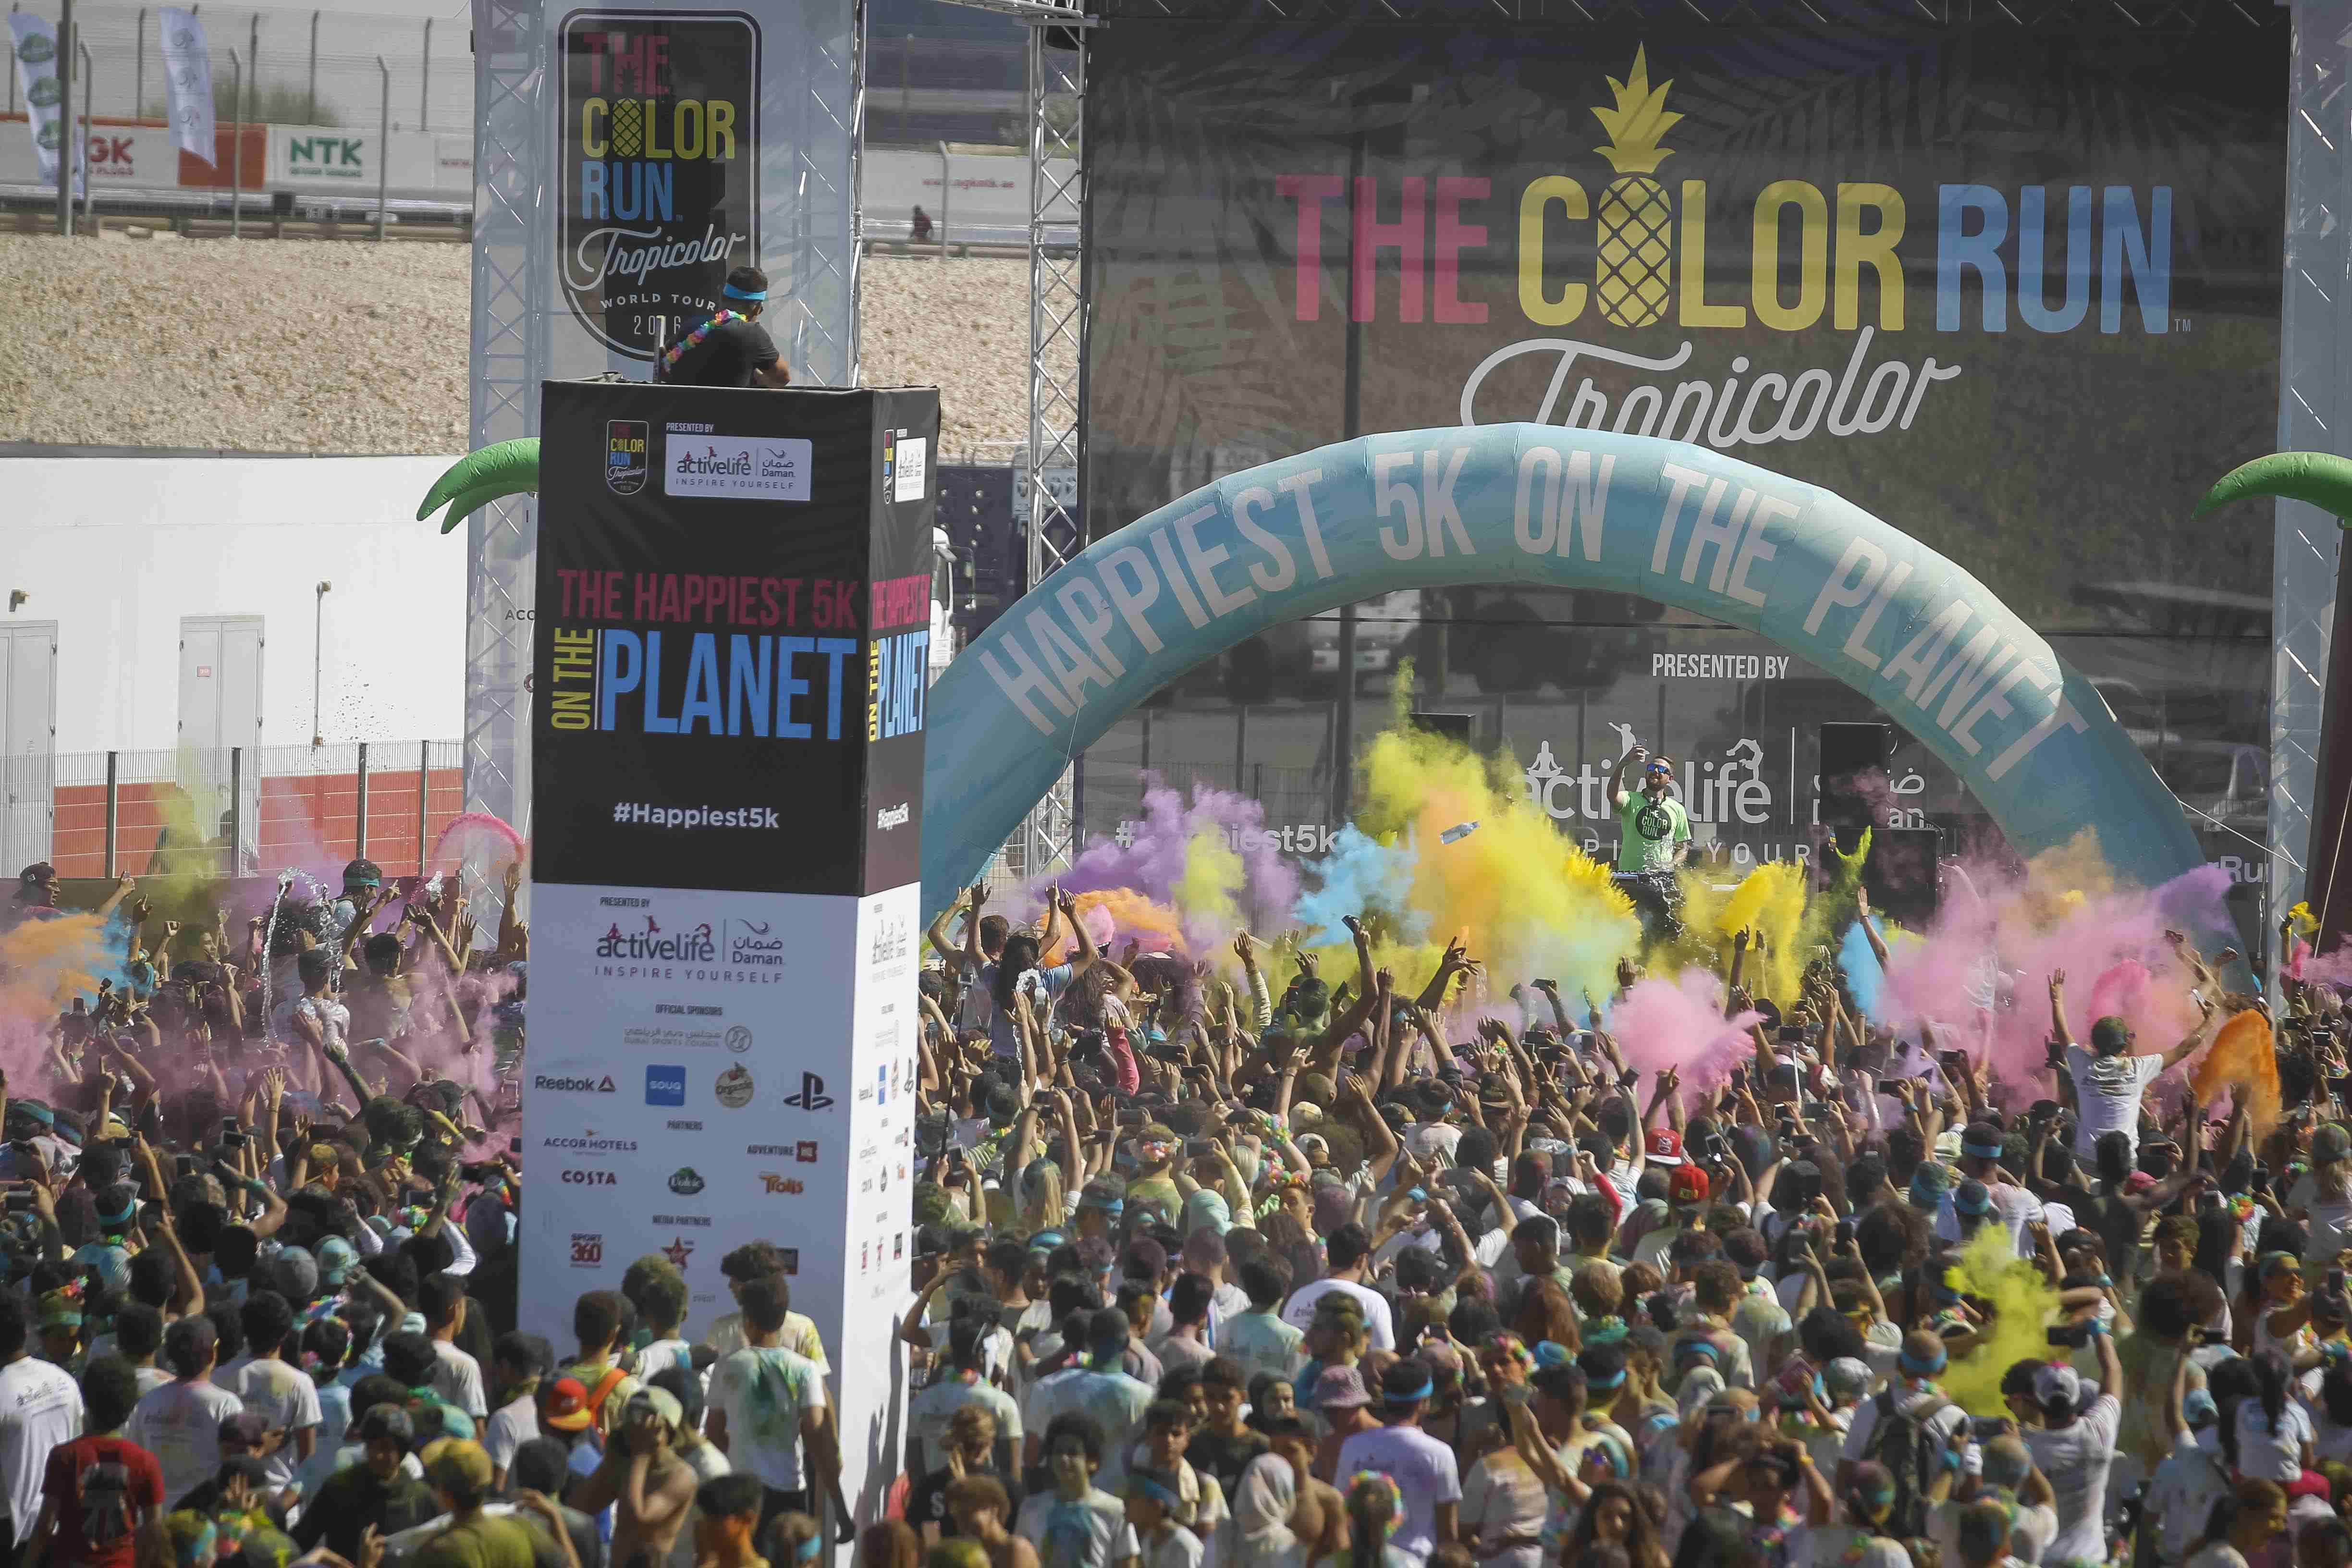 the-color-run-presented-by-damans-activelife-brought-more-than-14000-color-runners-to-dubai